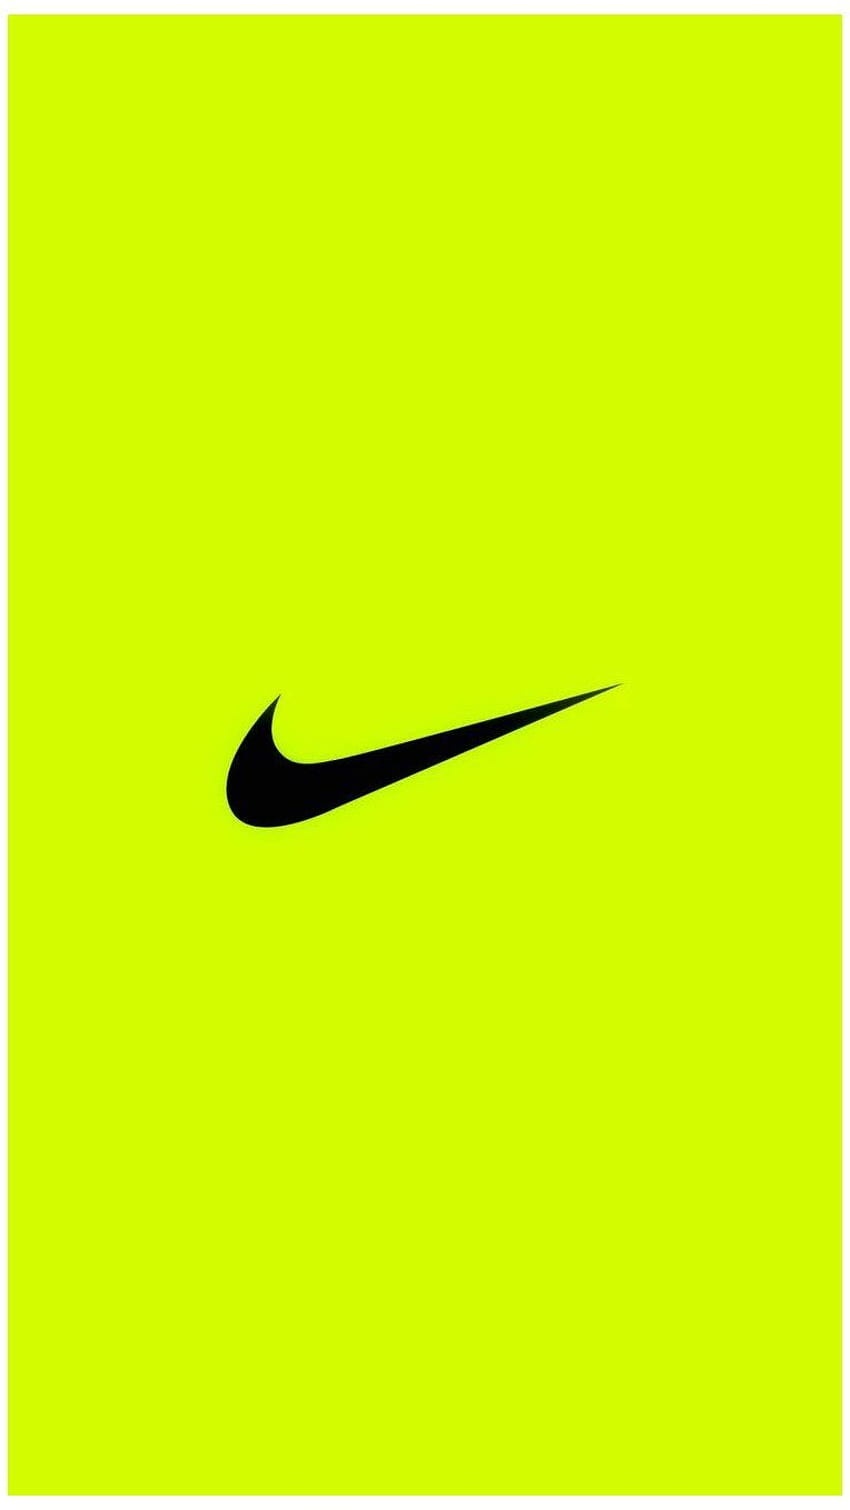 Nike iPhone nike apple watch android HD phone wallpaper